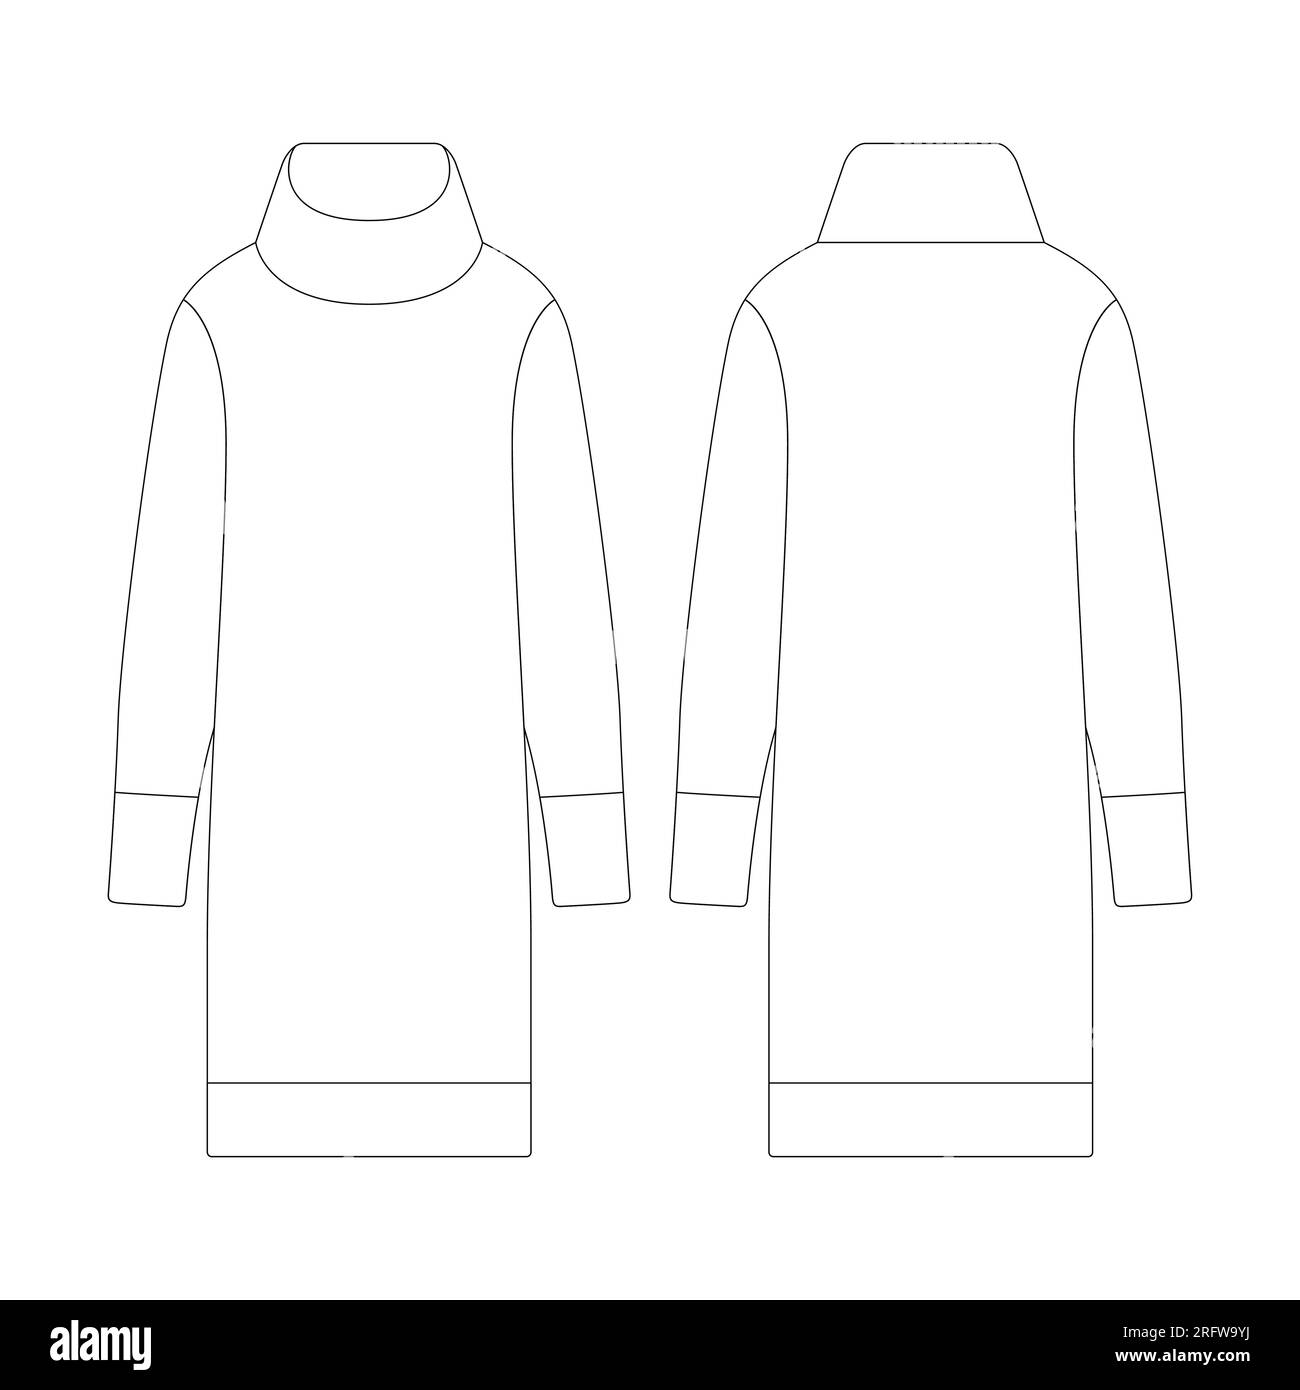 Template women turtleneck long sleeved dress vector illustration flat design outline clothing collection outerwear Stock Vector